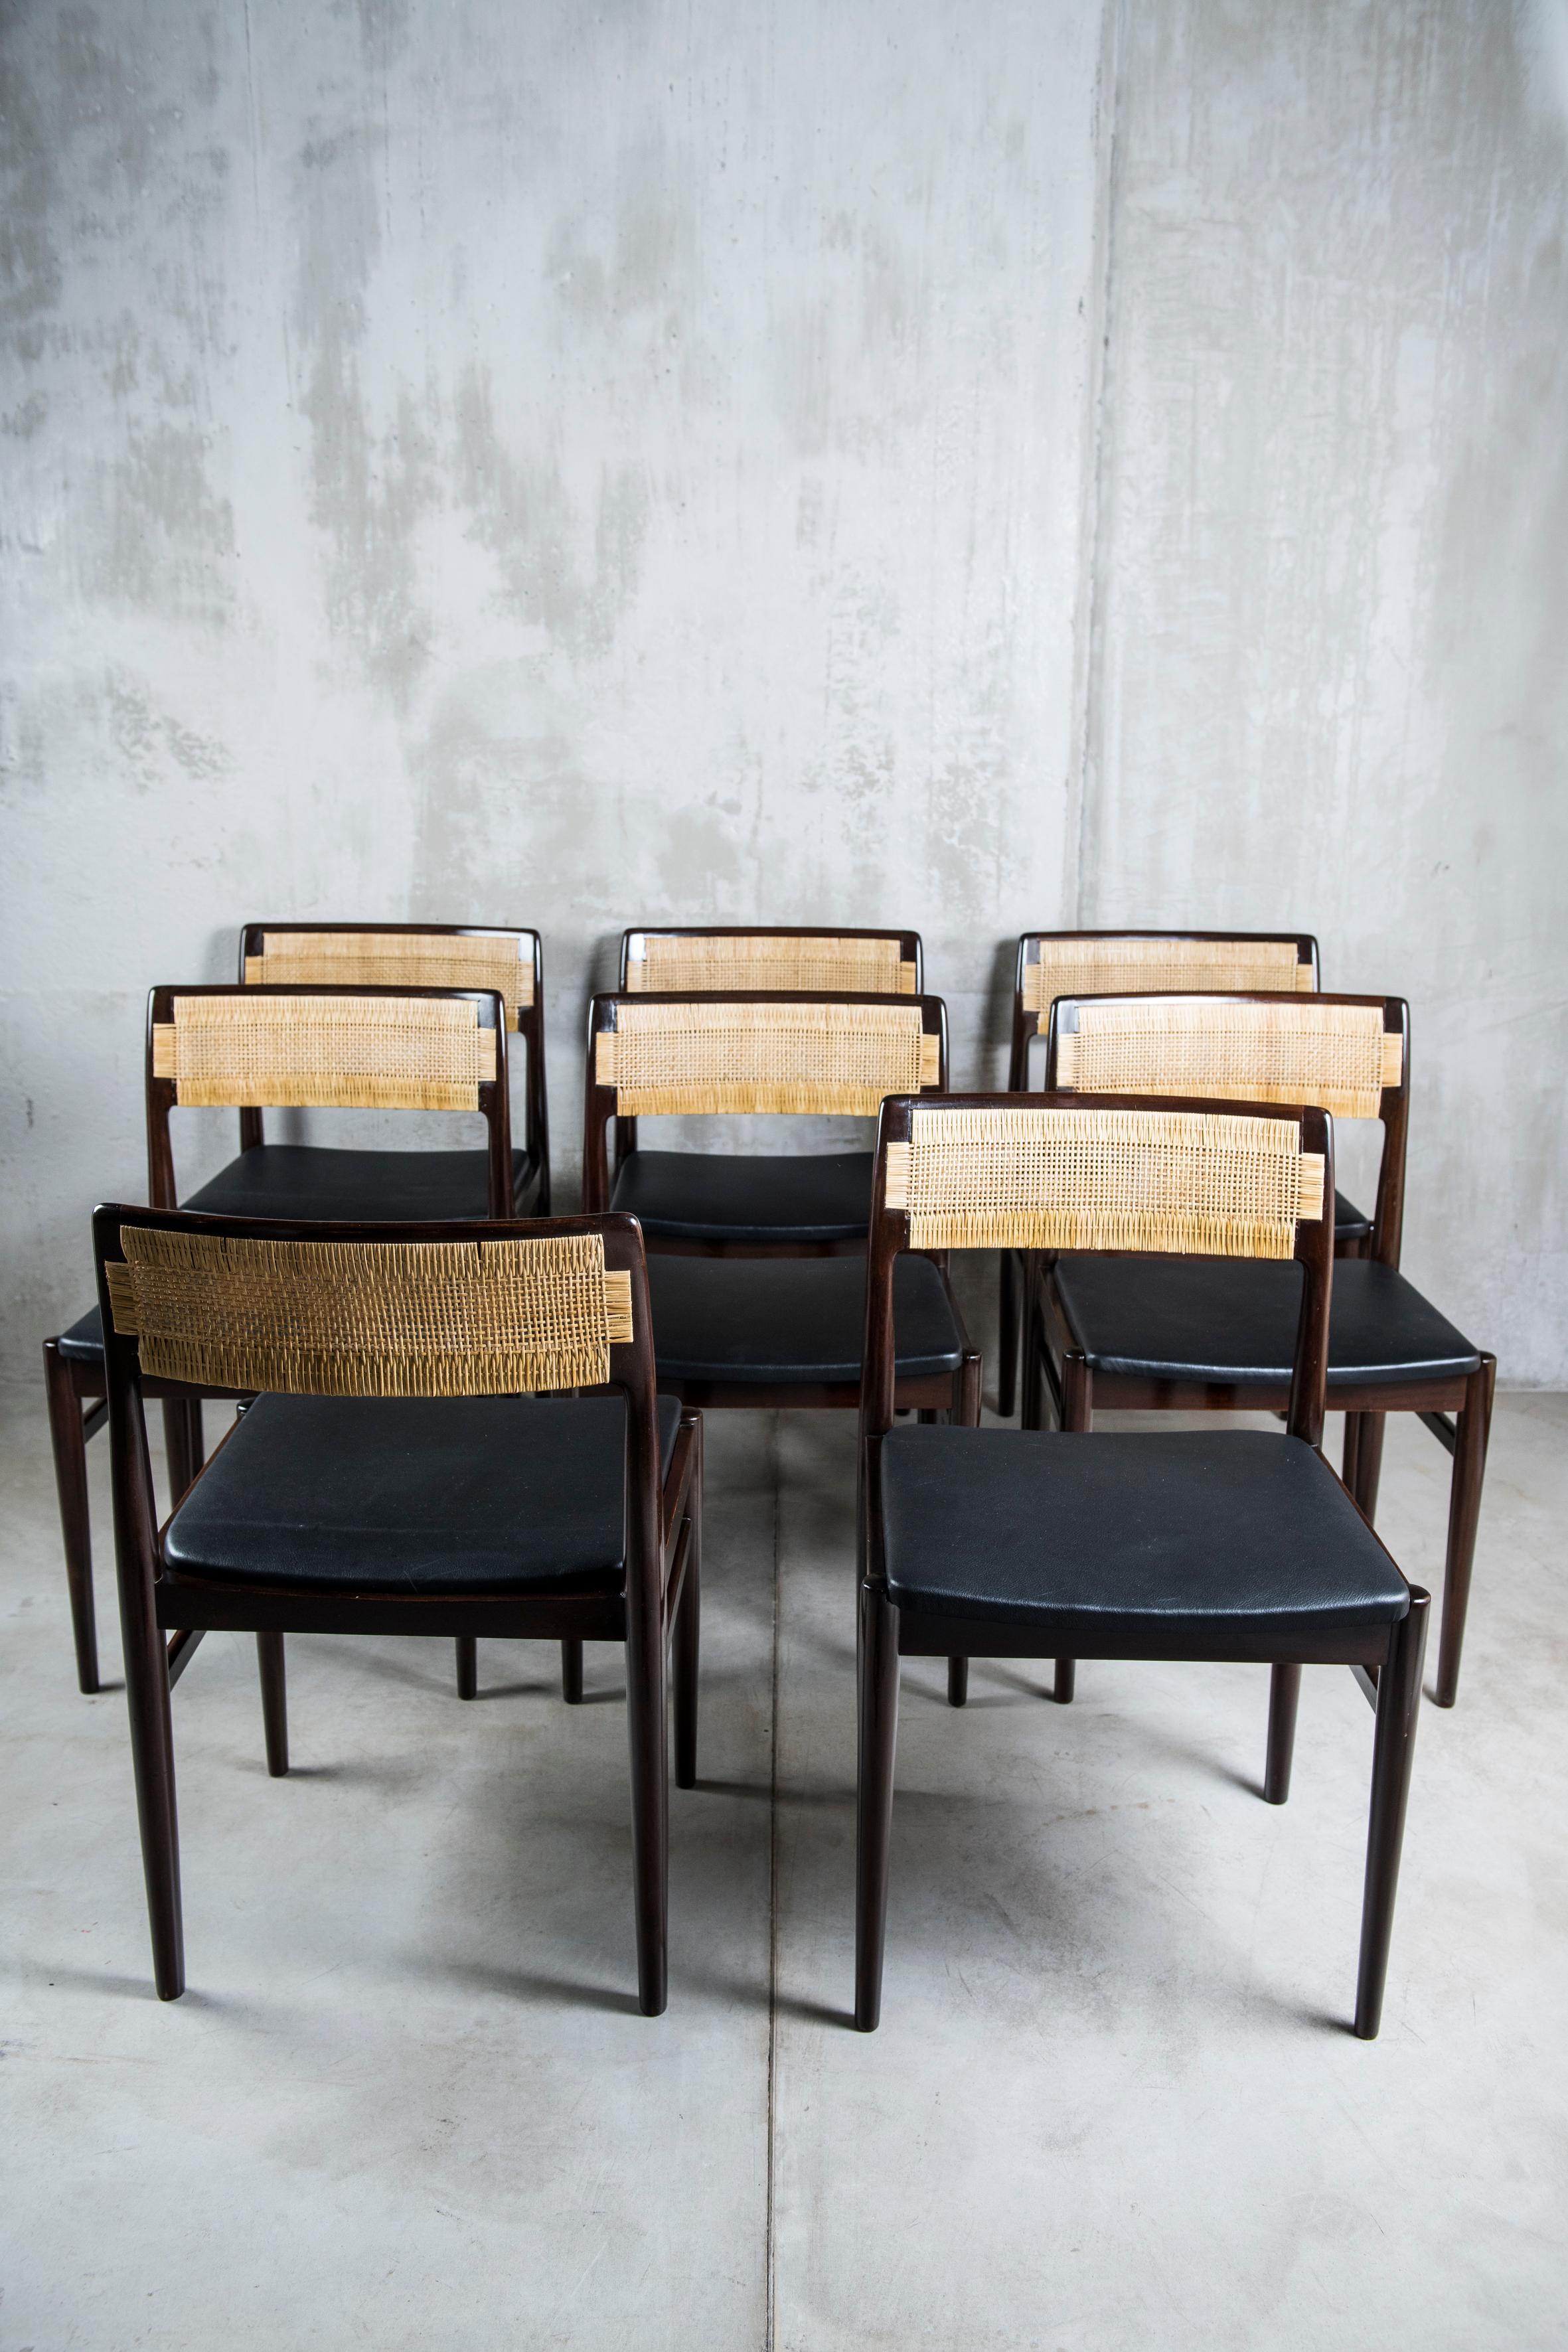 Set of Eight Dining Room Chairs Design by Erik Worts, Denmark, circa 1960. 1